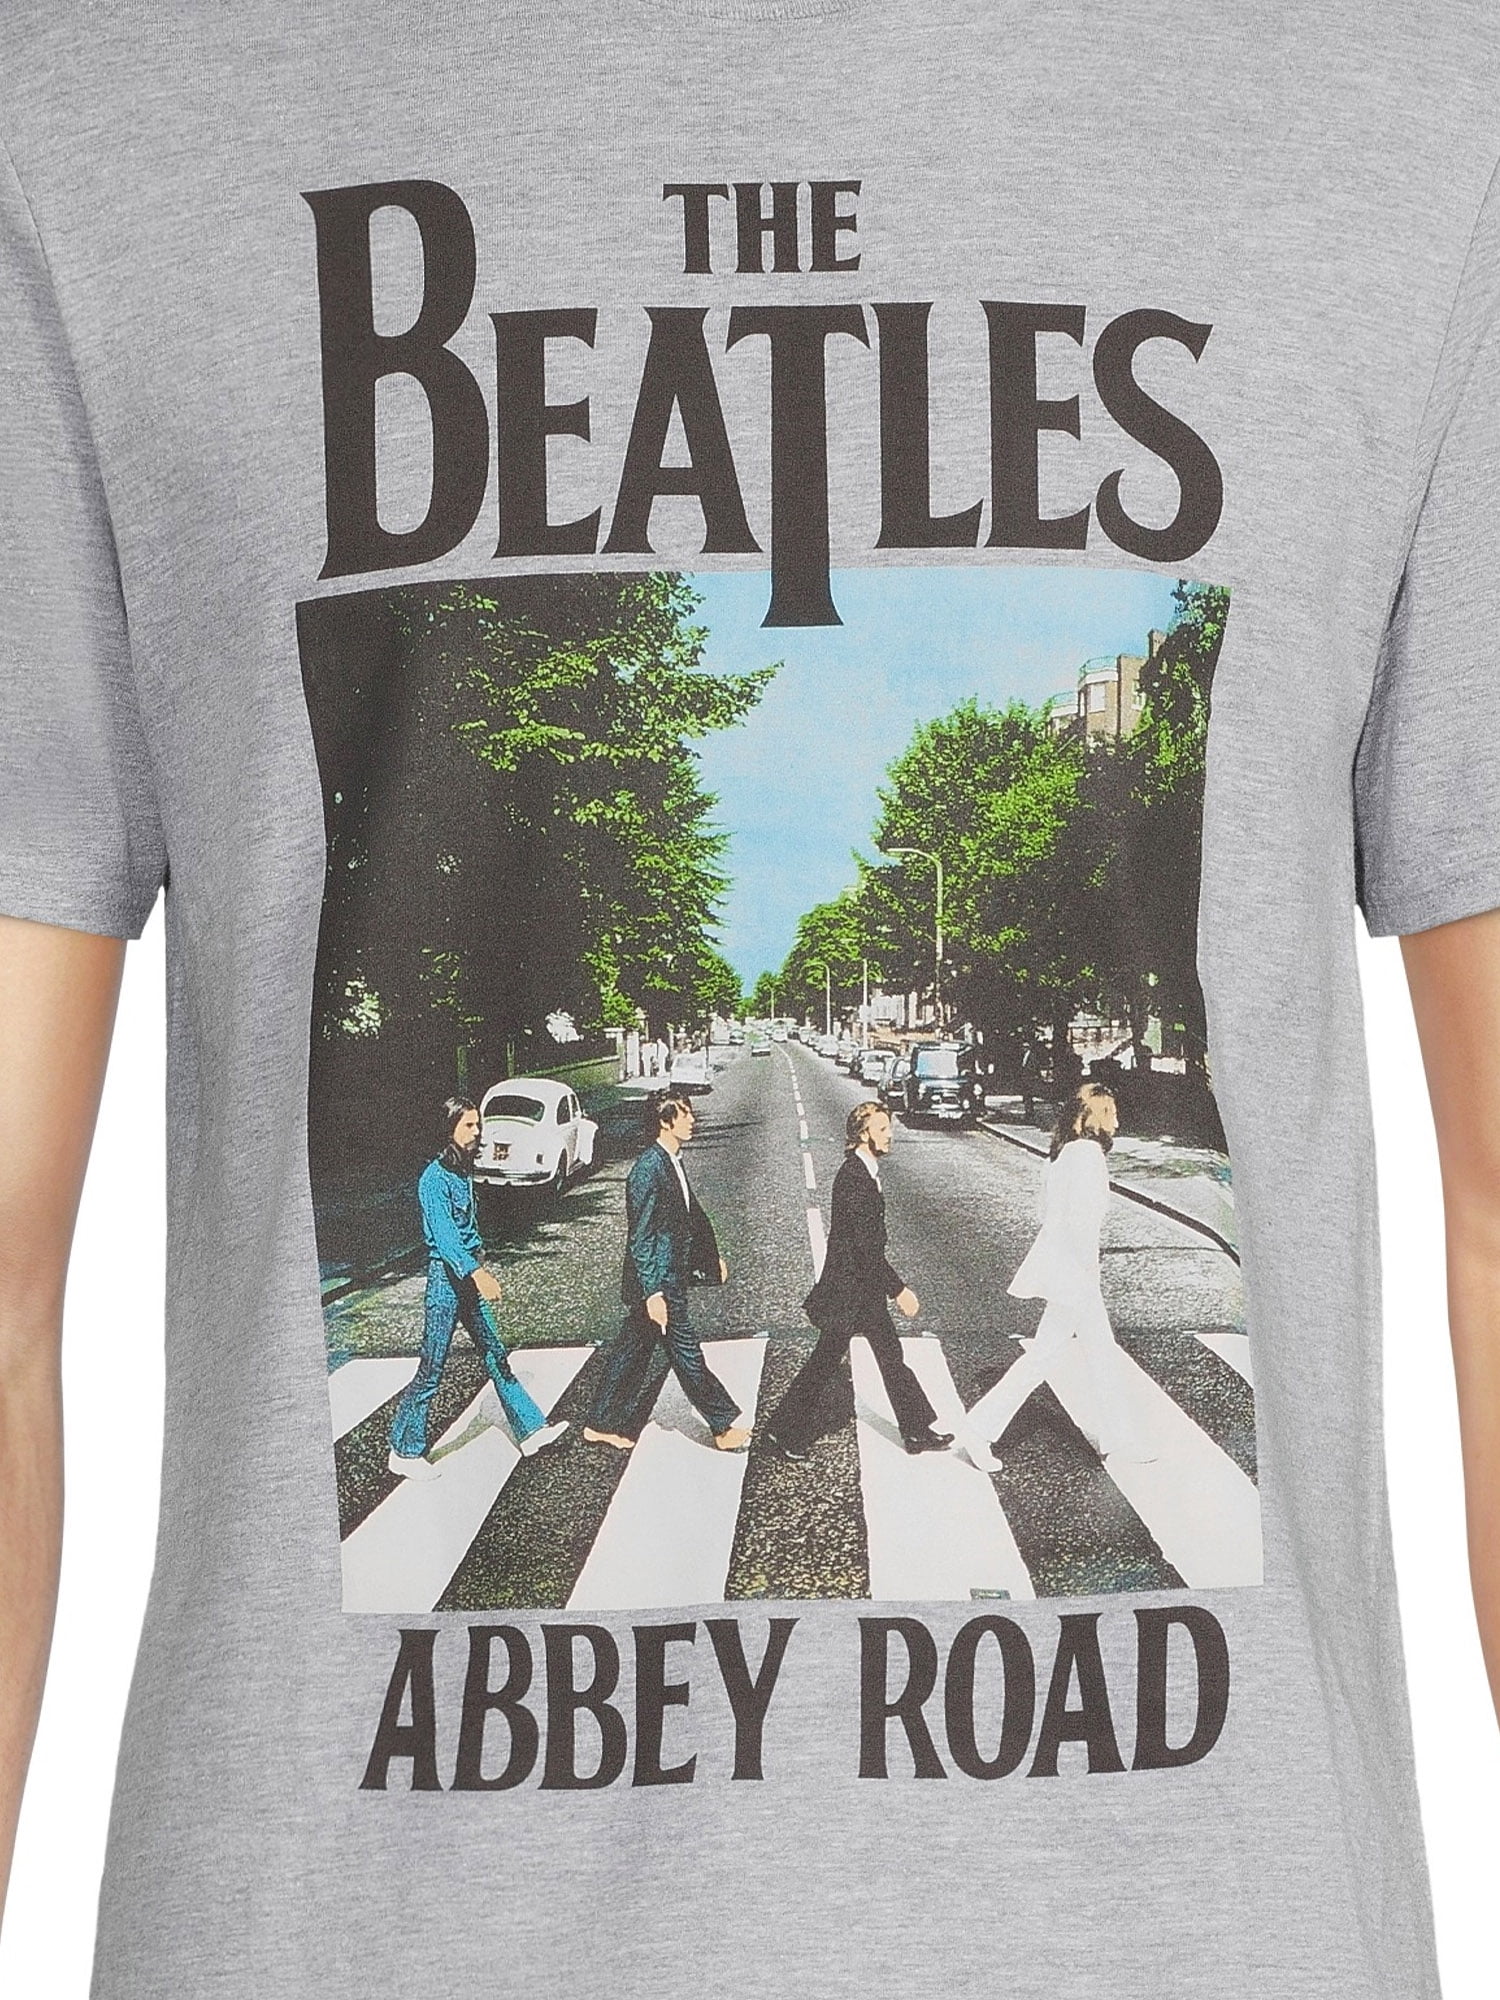 Short Road Abbey with Beatles Graphic Men\'s The T-Shirt Sleeves